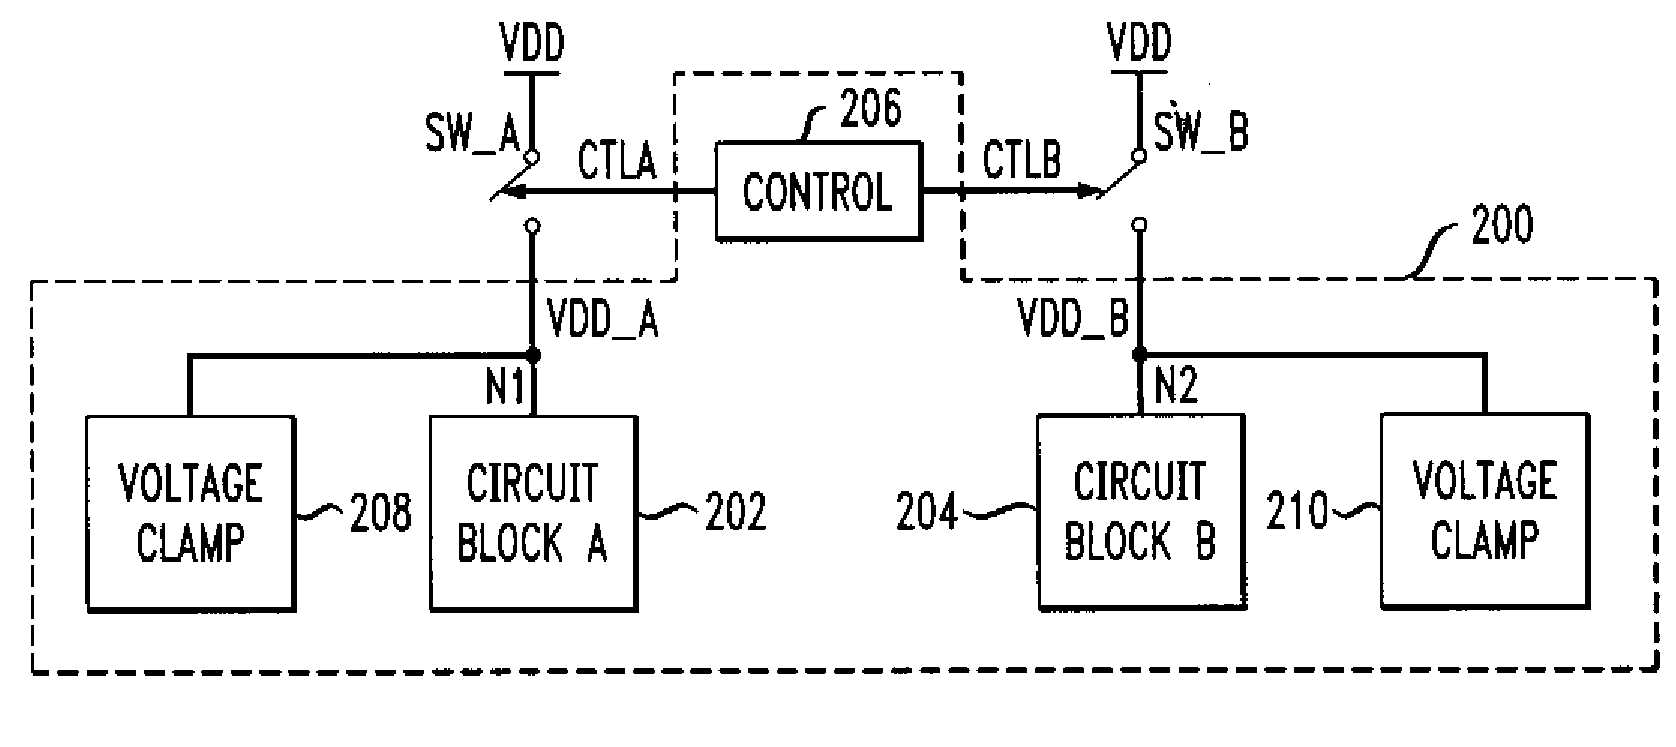 Method and Apparatus for Improving Reliability of an Integrated Circuit Having Multiple Power Domains